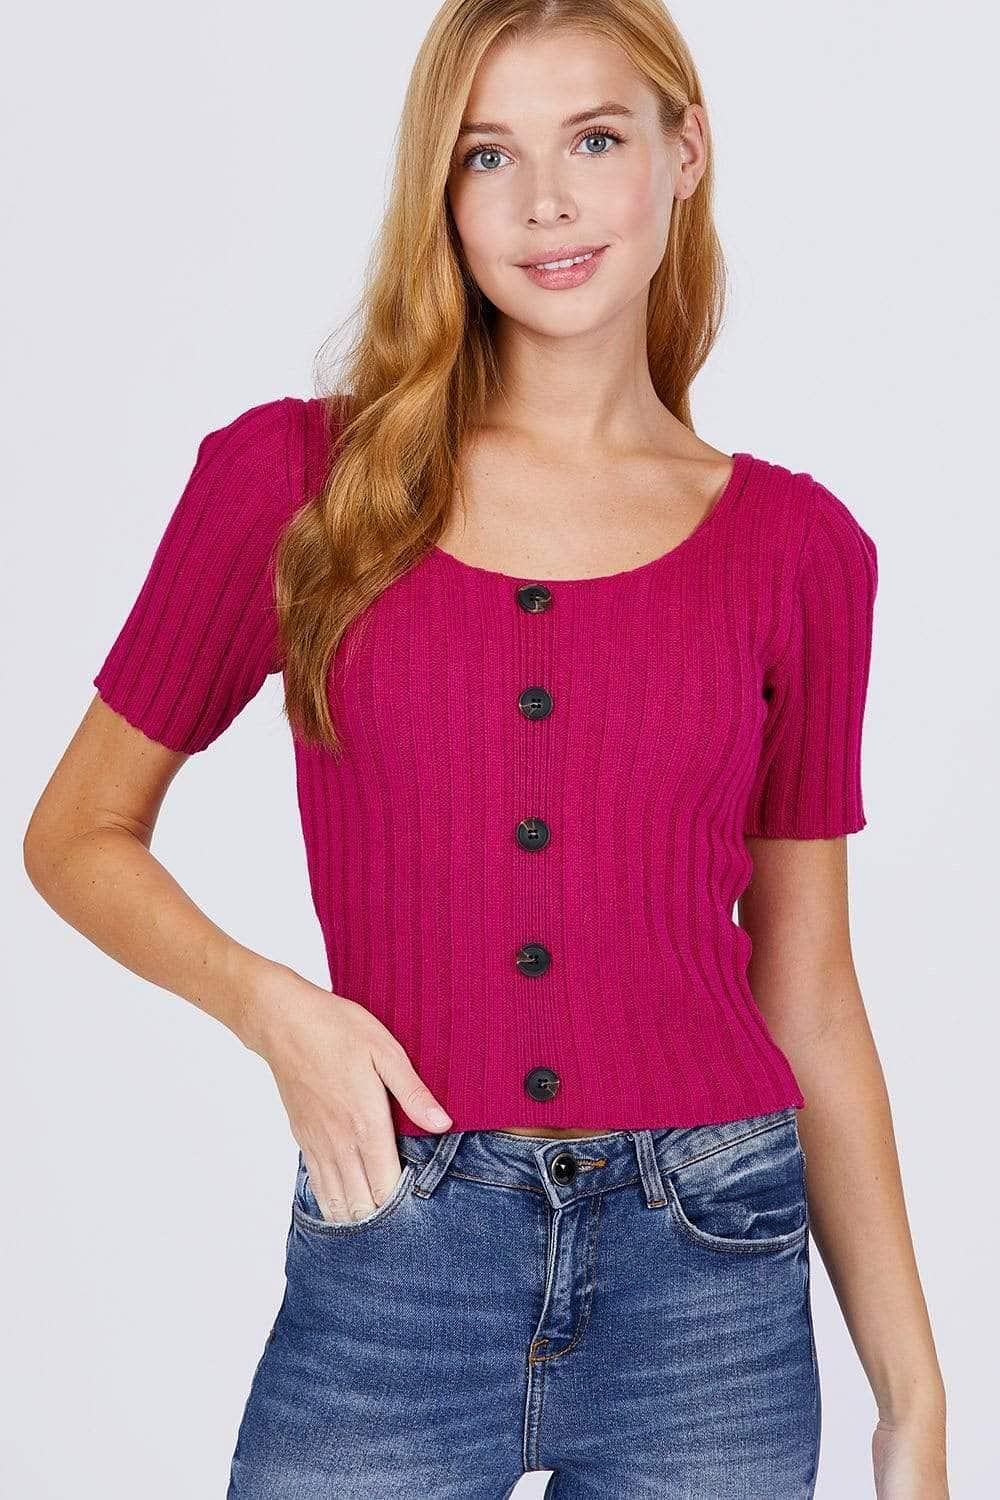 Fuchsia Short Sleeve Rib Knitted Sweater - Shopping Therapy Top